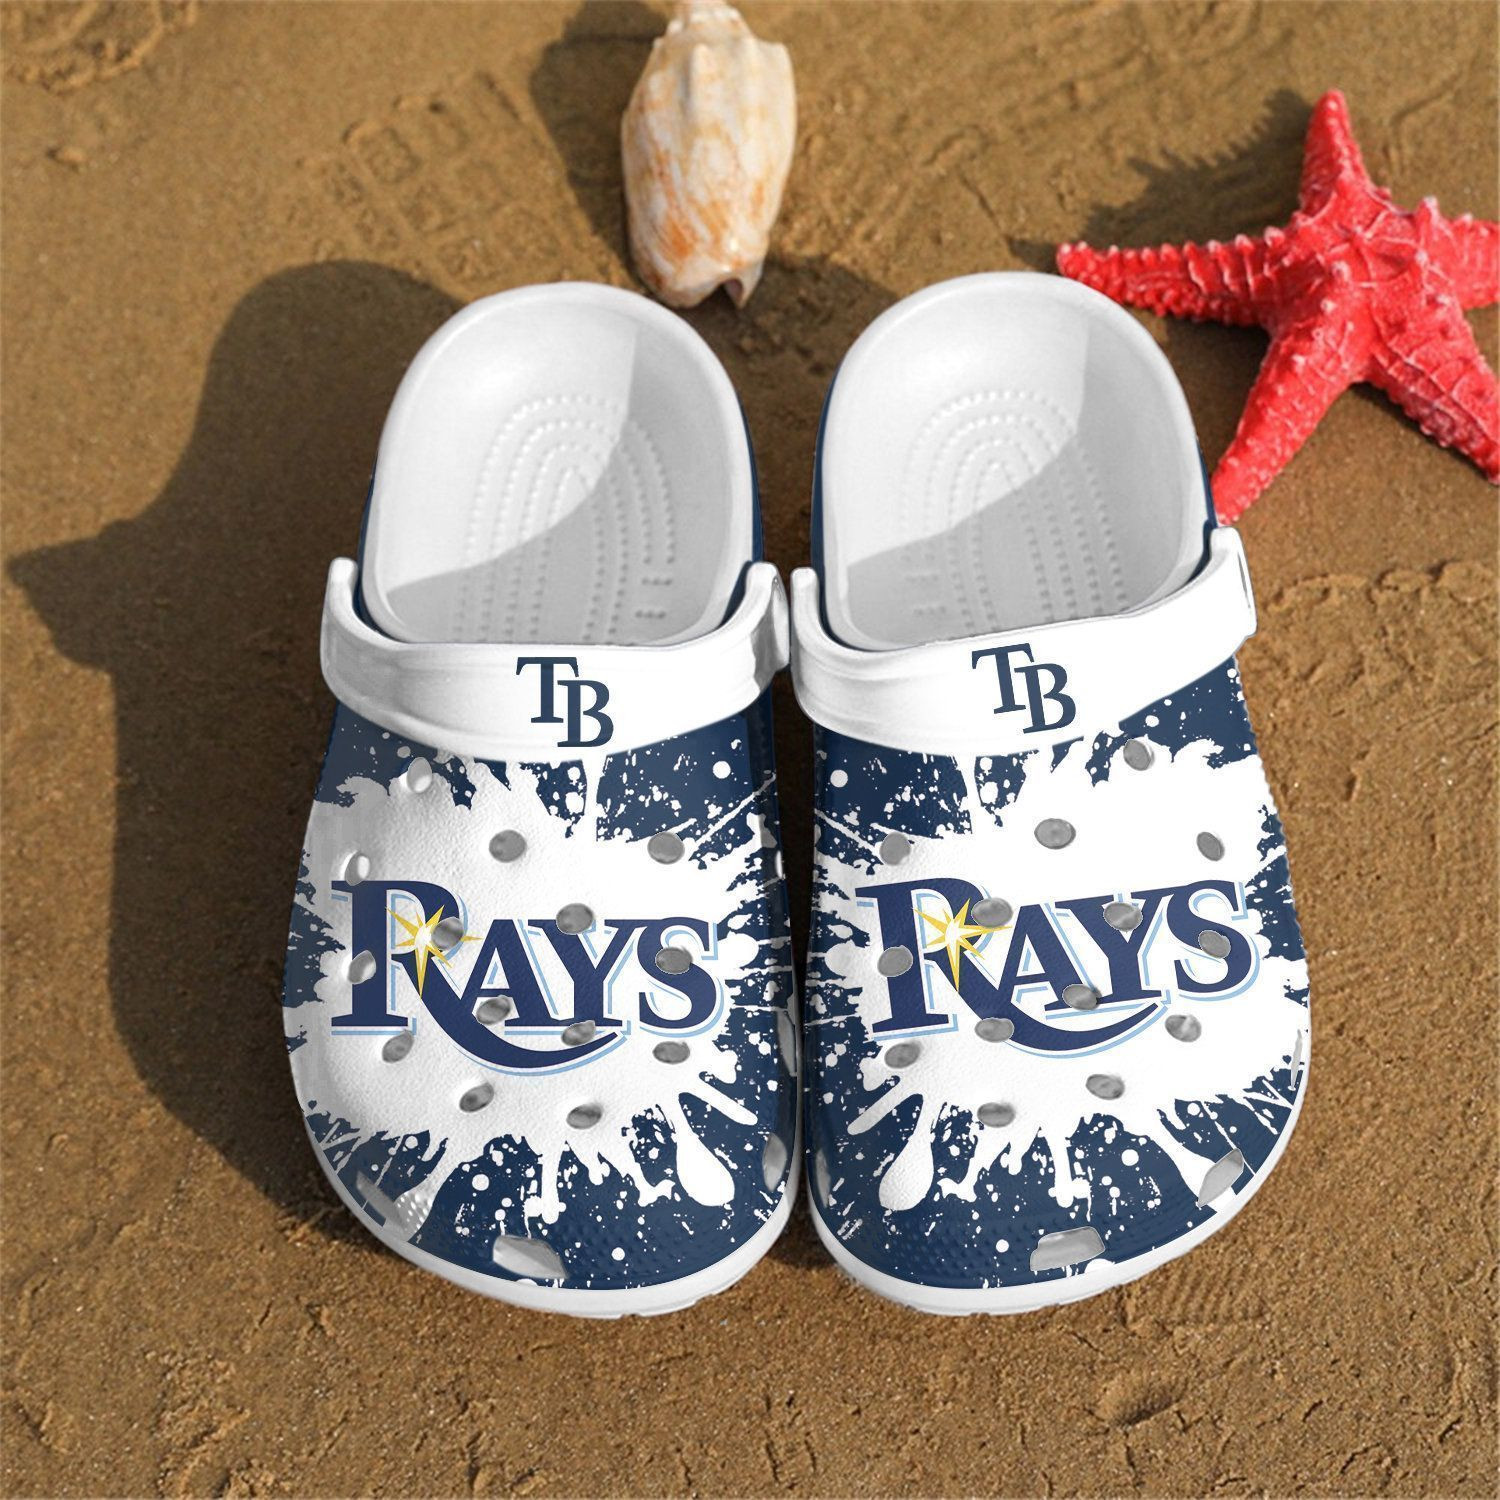 Tampa Bay Rays Mlb Teams Gift For Fan Rubber Crocs Clog Shoescrocband Clogs